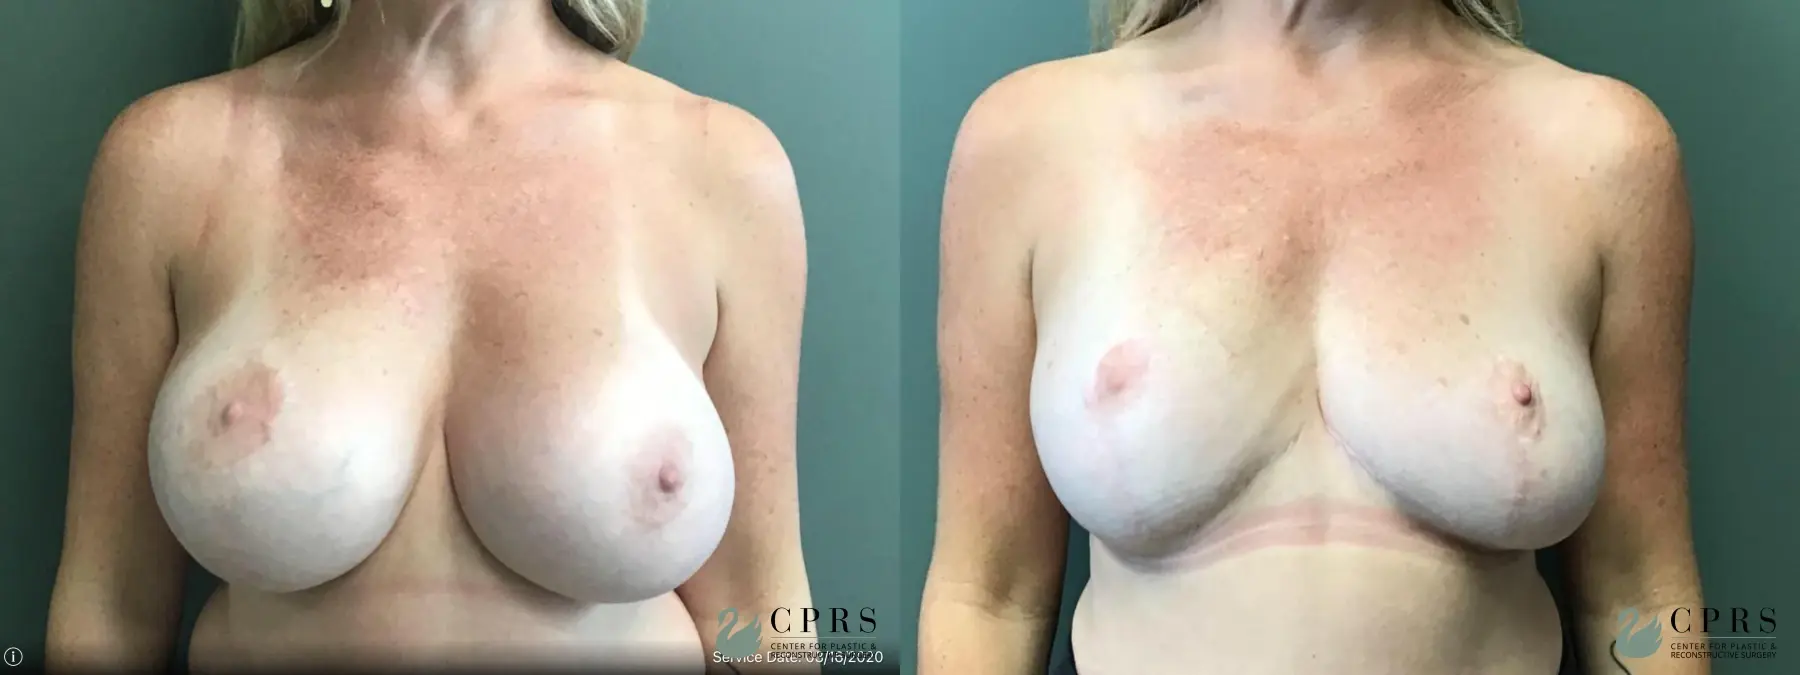 Breast Implant Removal With Lift: Patient 1 - Before and After 1